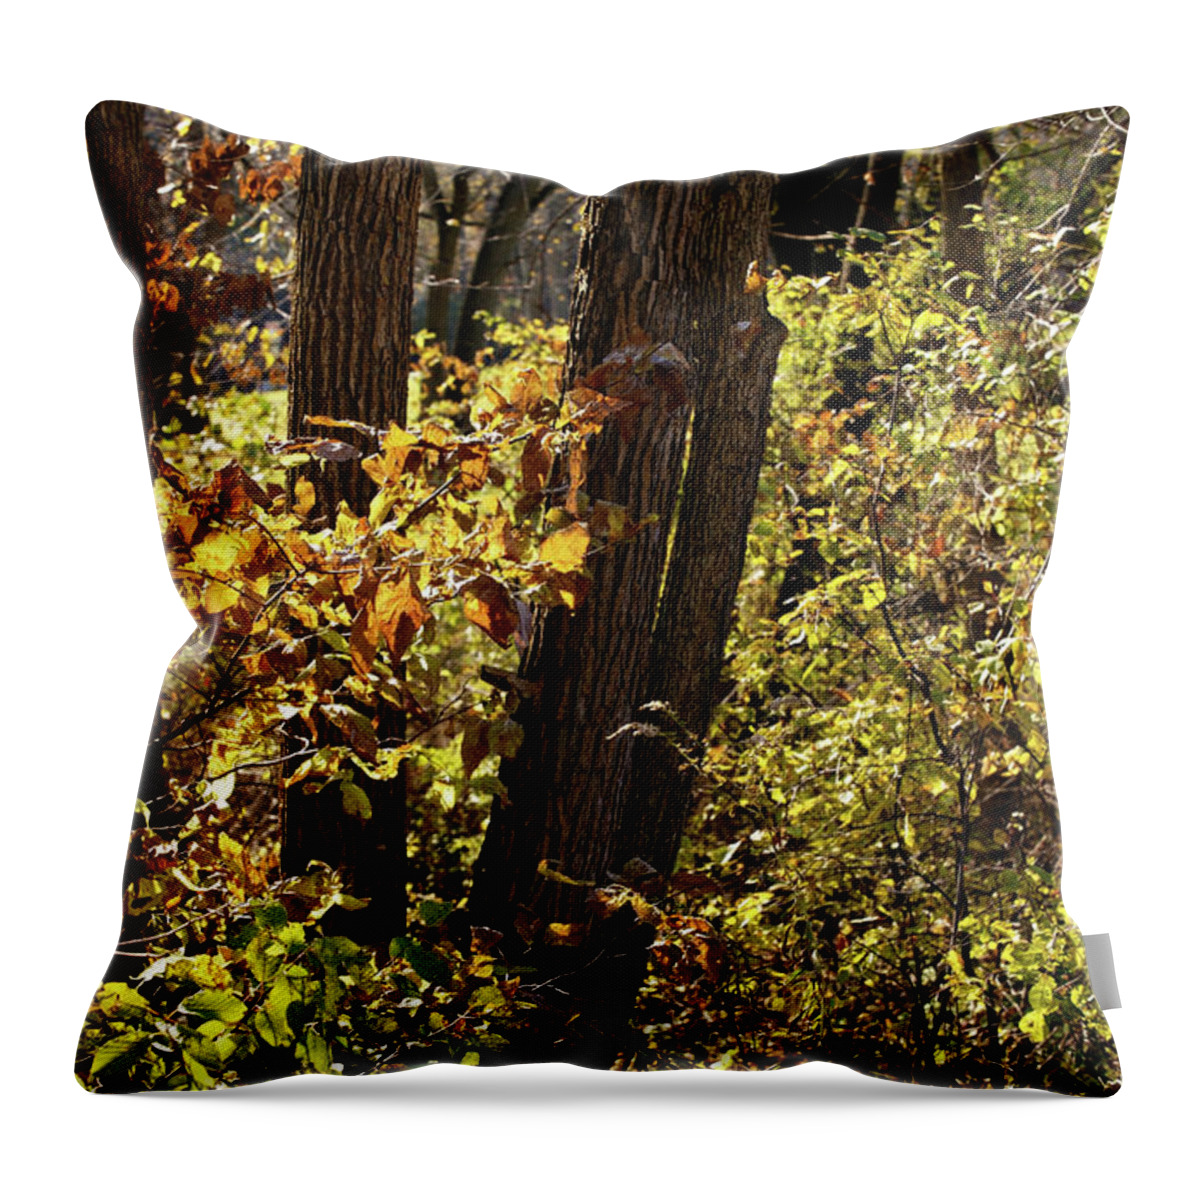 Woods Throw Pillow featuring the photograph A Walk Through The Woods - 2 by Linda Shafer